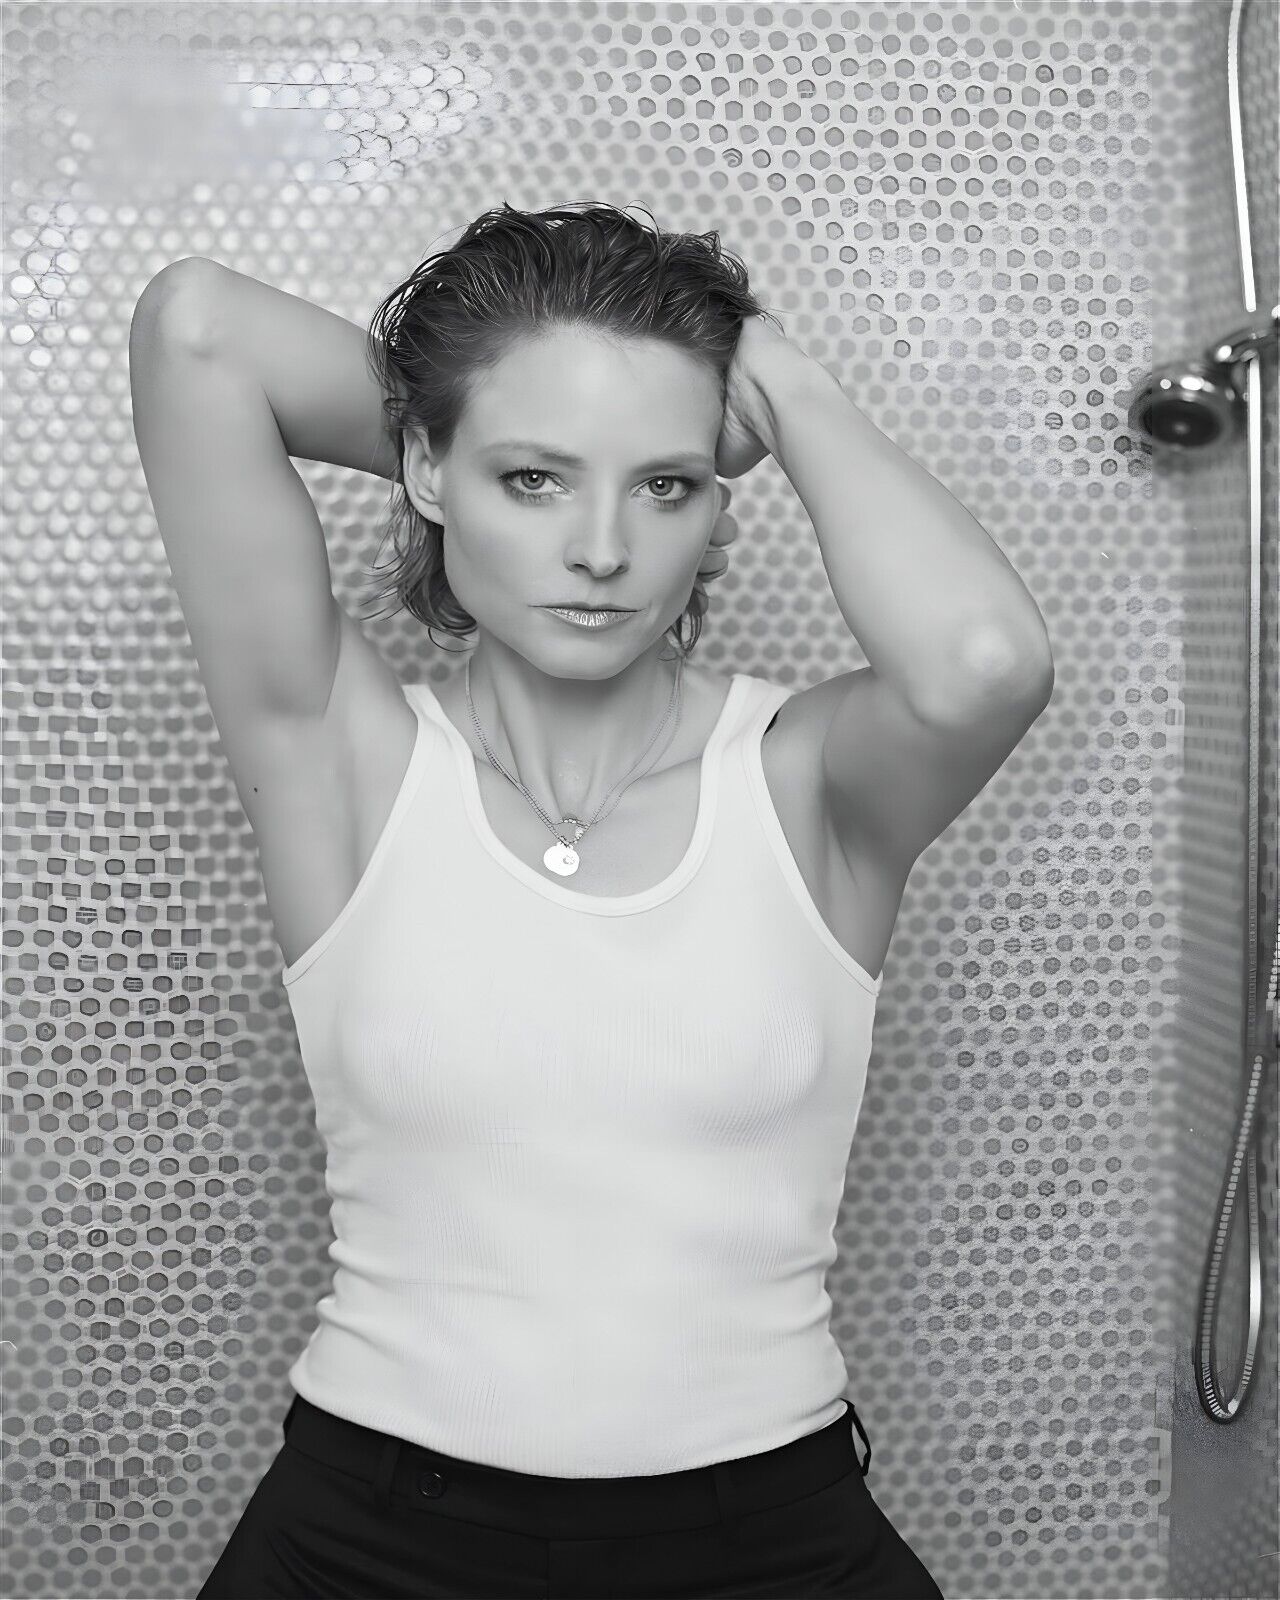 Jodie Foster 8 x 10 Picture Print Photograph Sexy Photo Actress a797